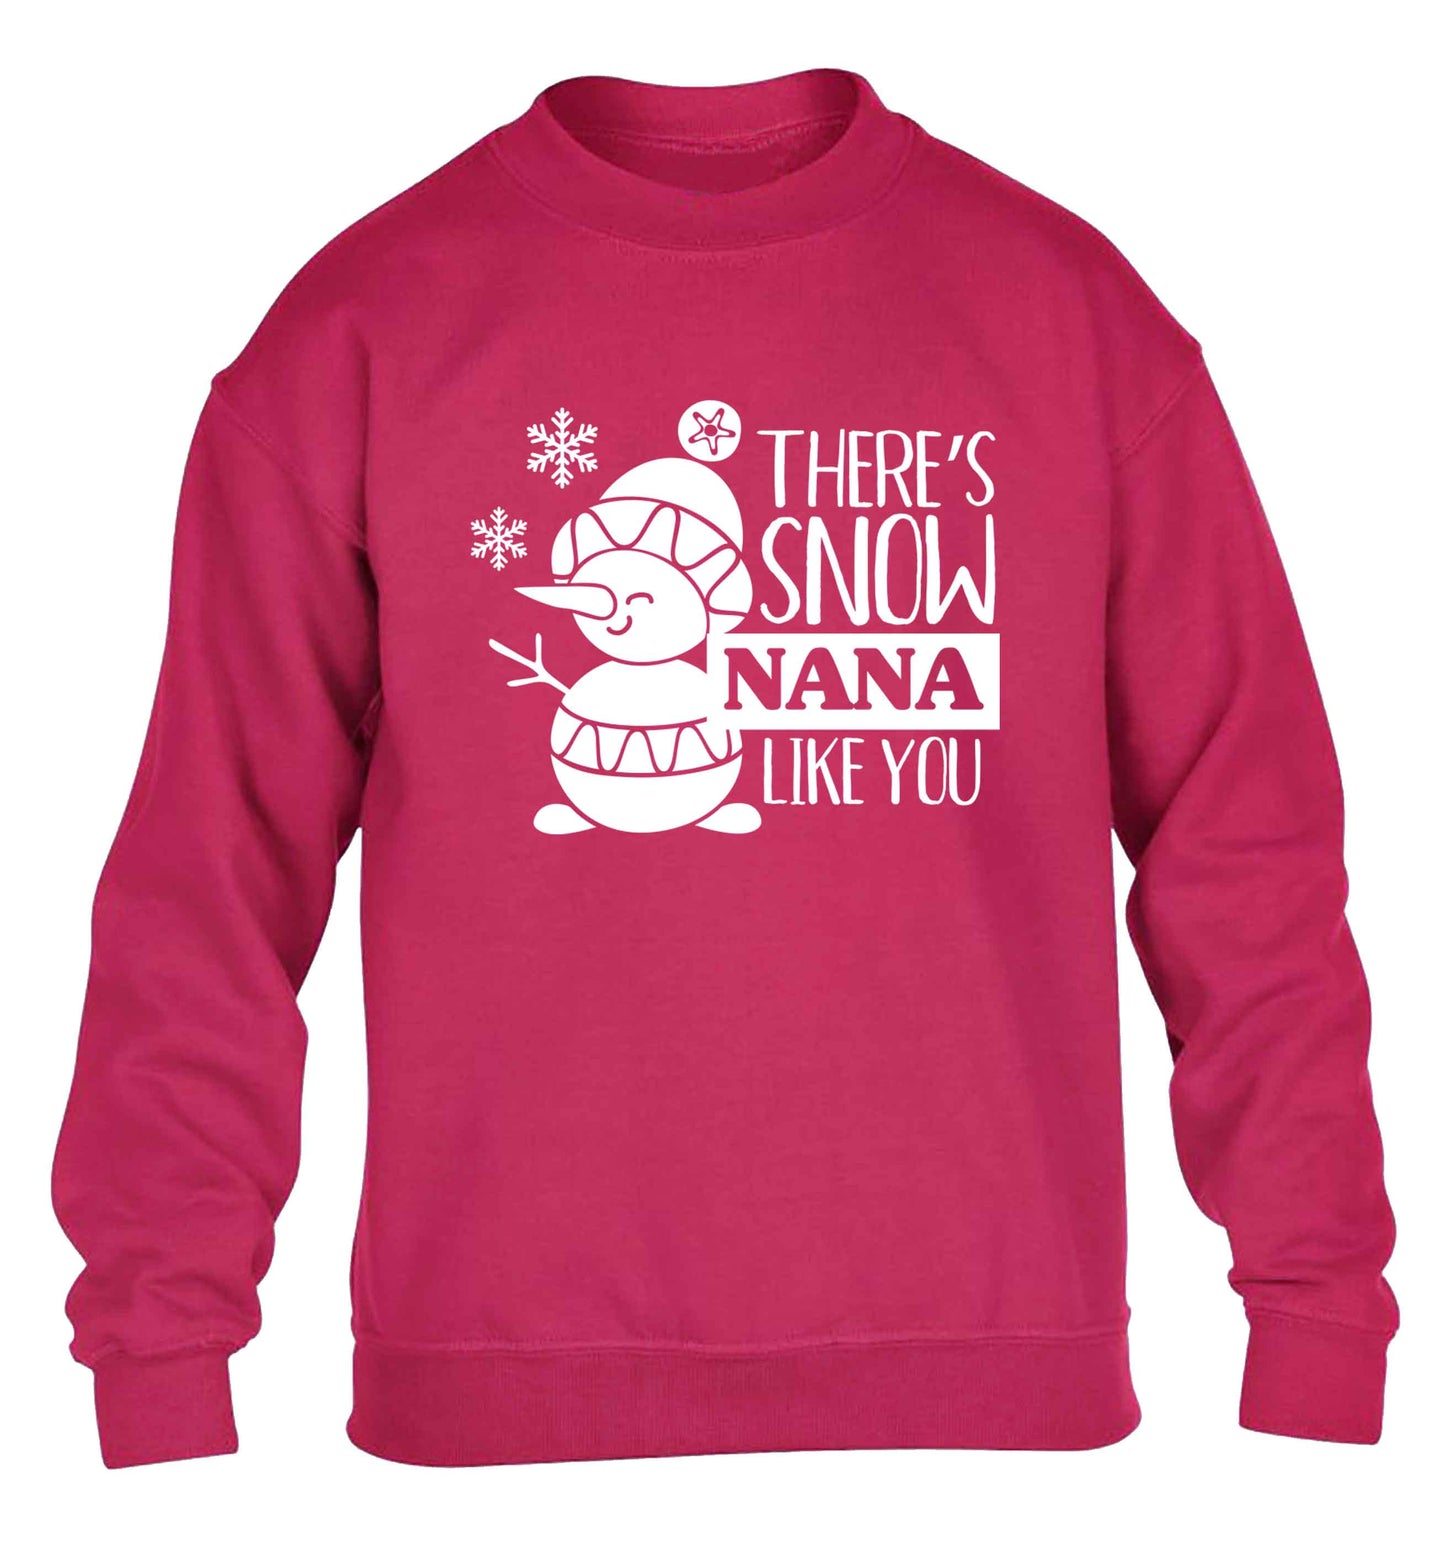 There's snow nana like you children's pink sweater 12-13 Years